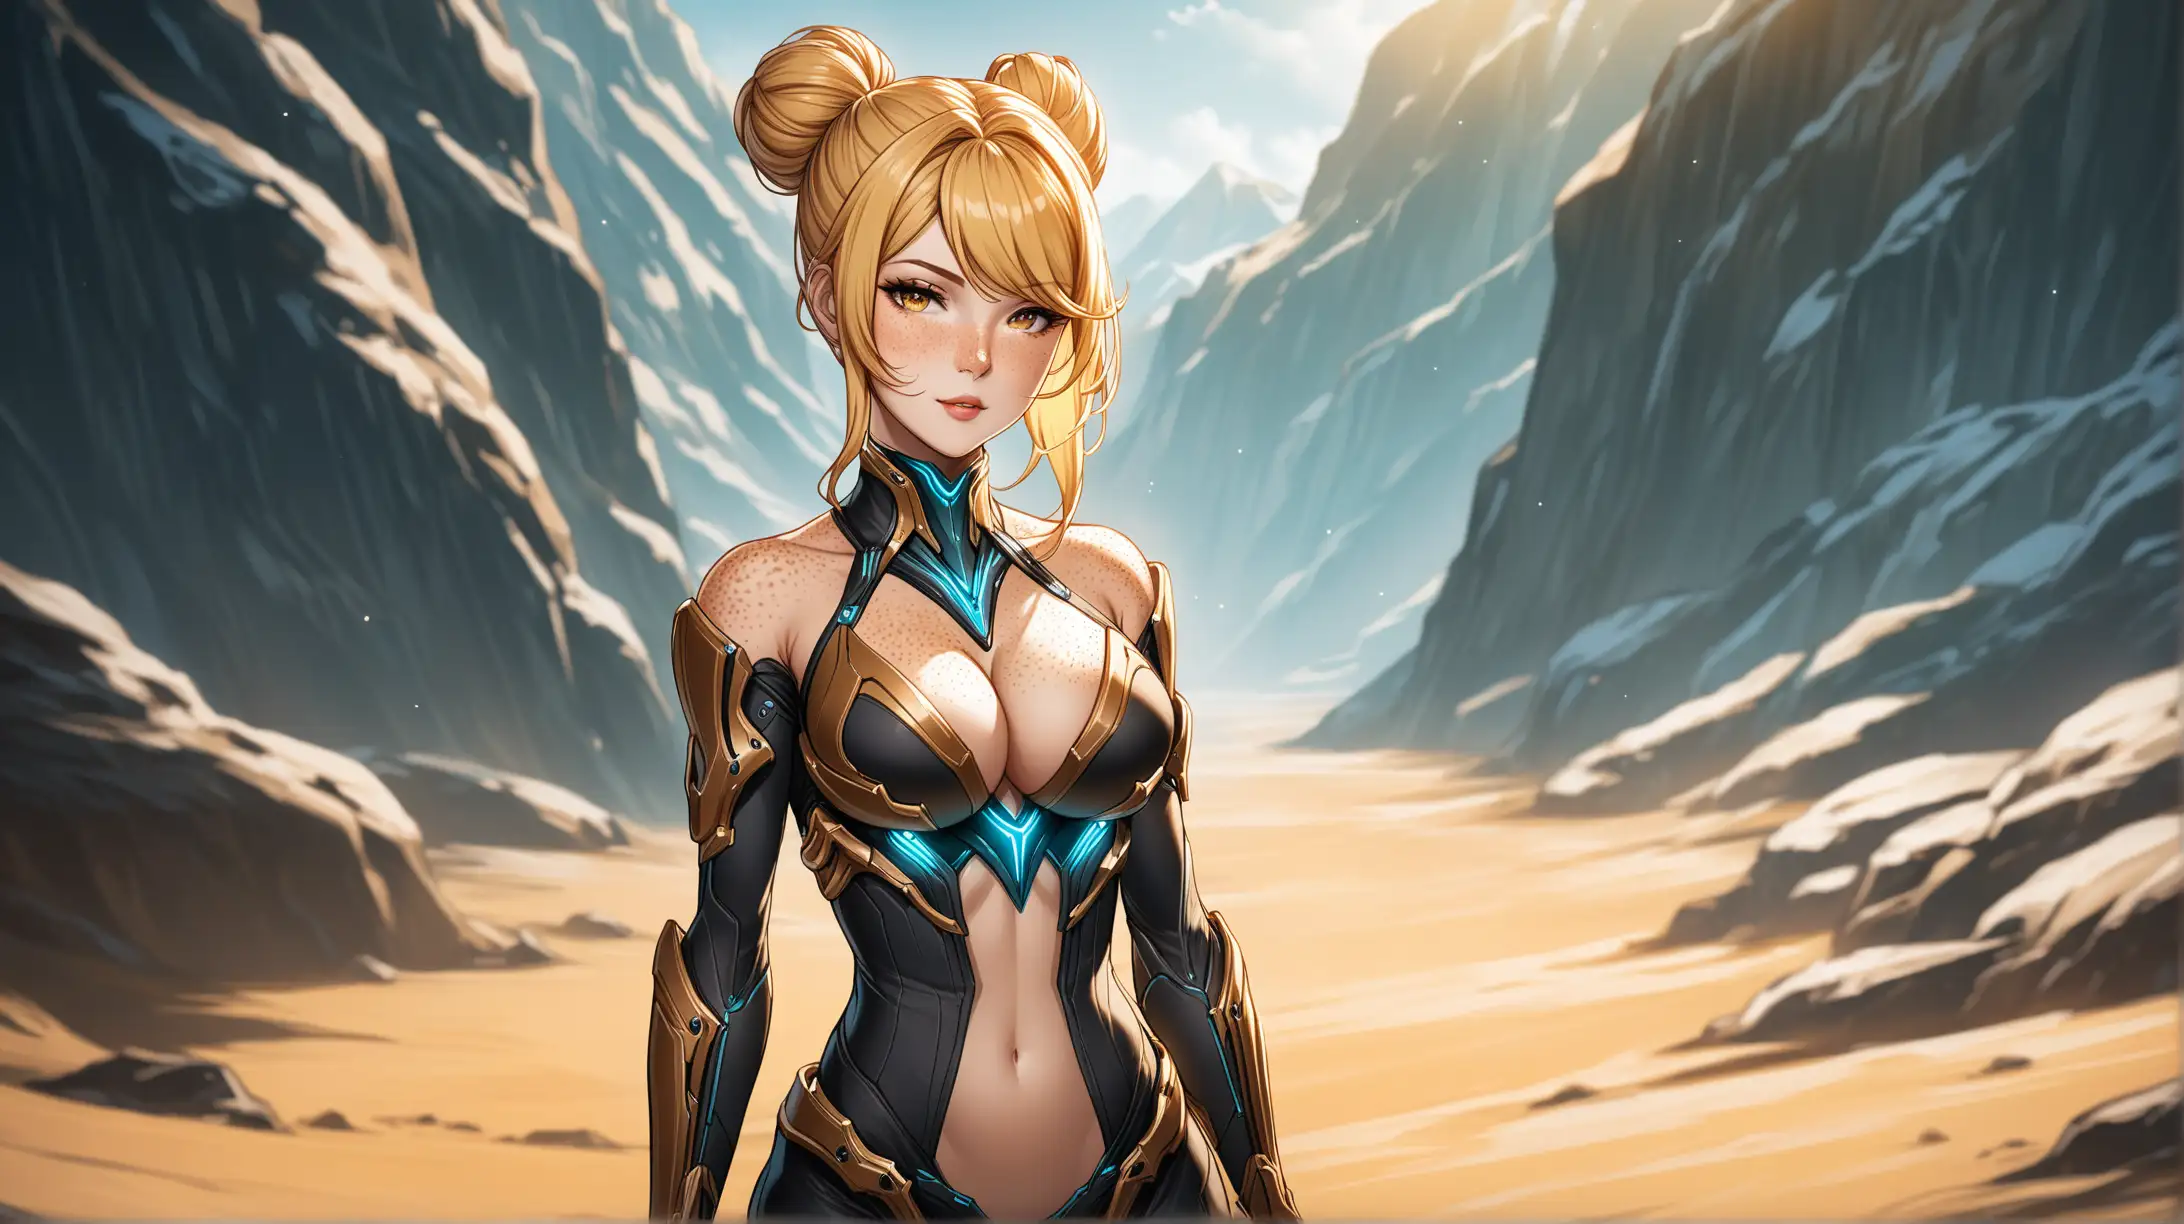 Seductive Woman with Long Blonde Hair in Warframeinspired Outfit